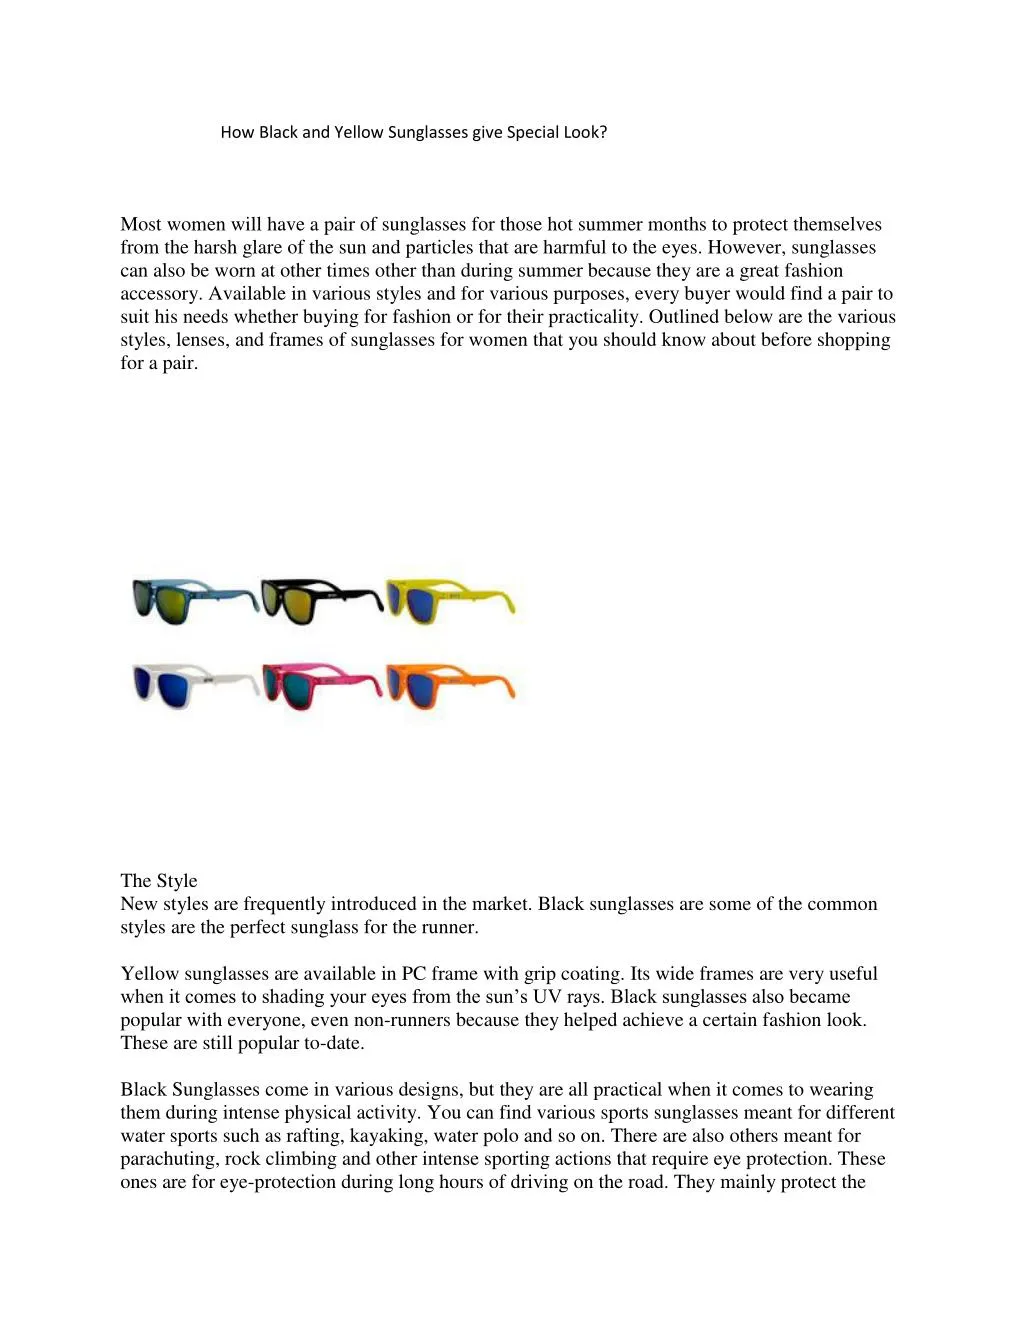 how black and yellow sunglasses give special look